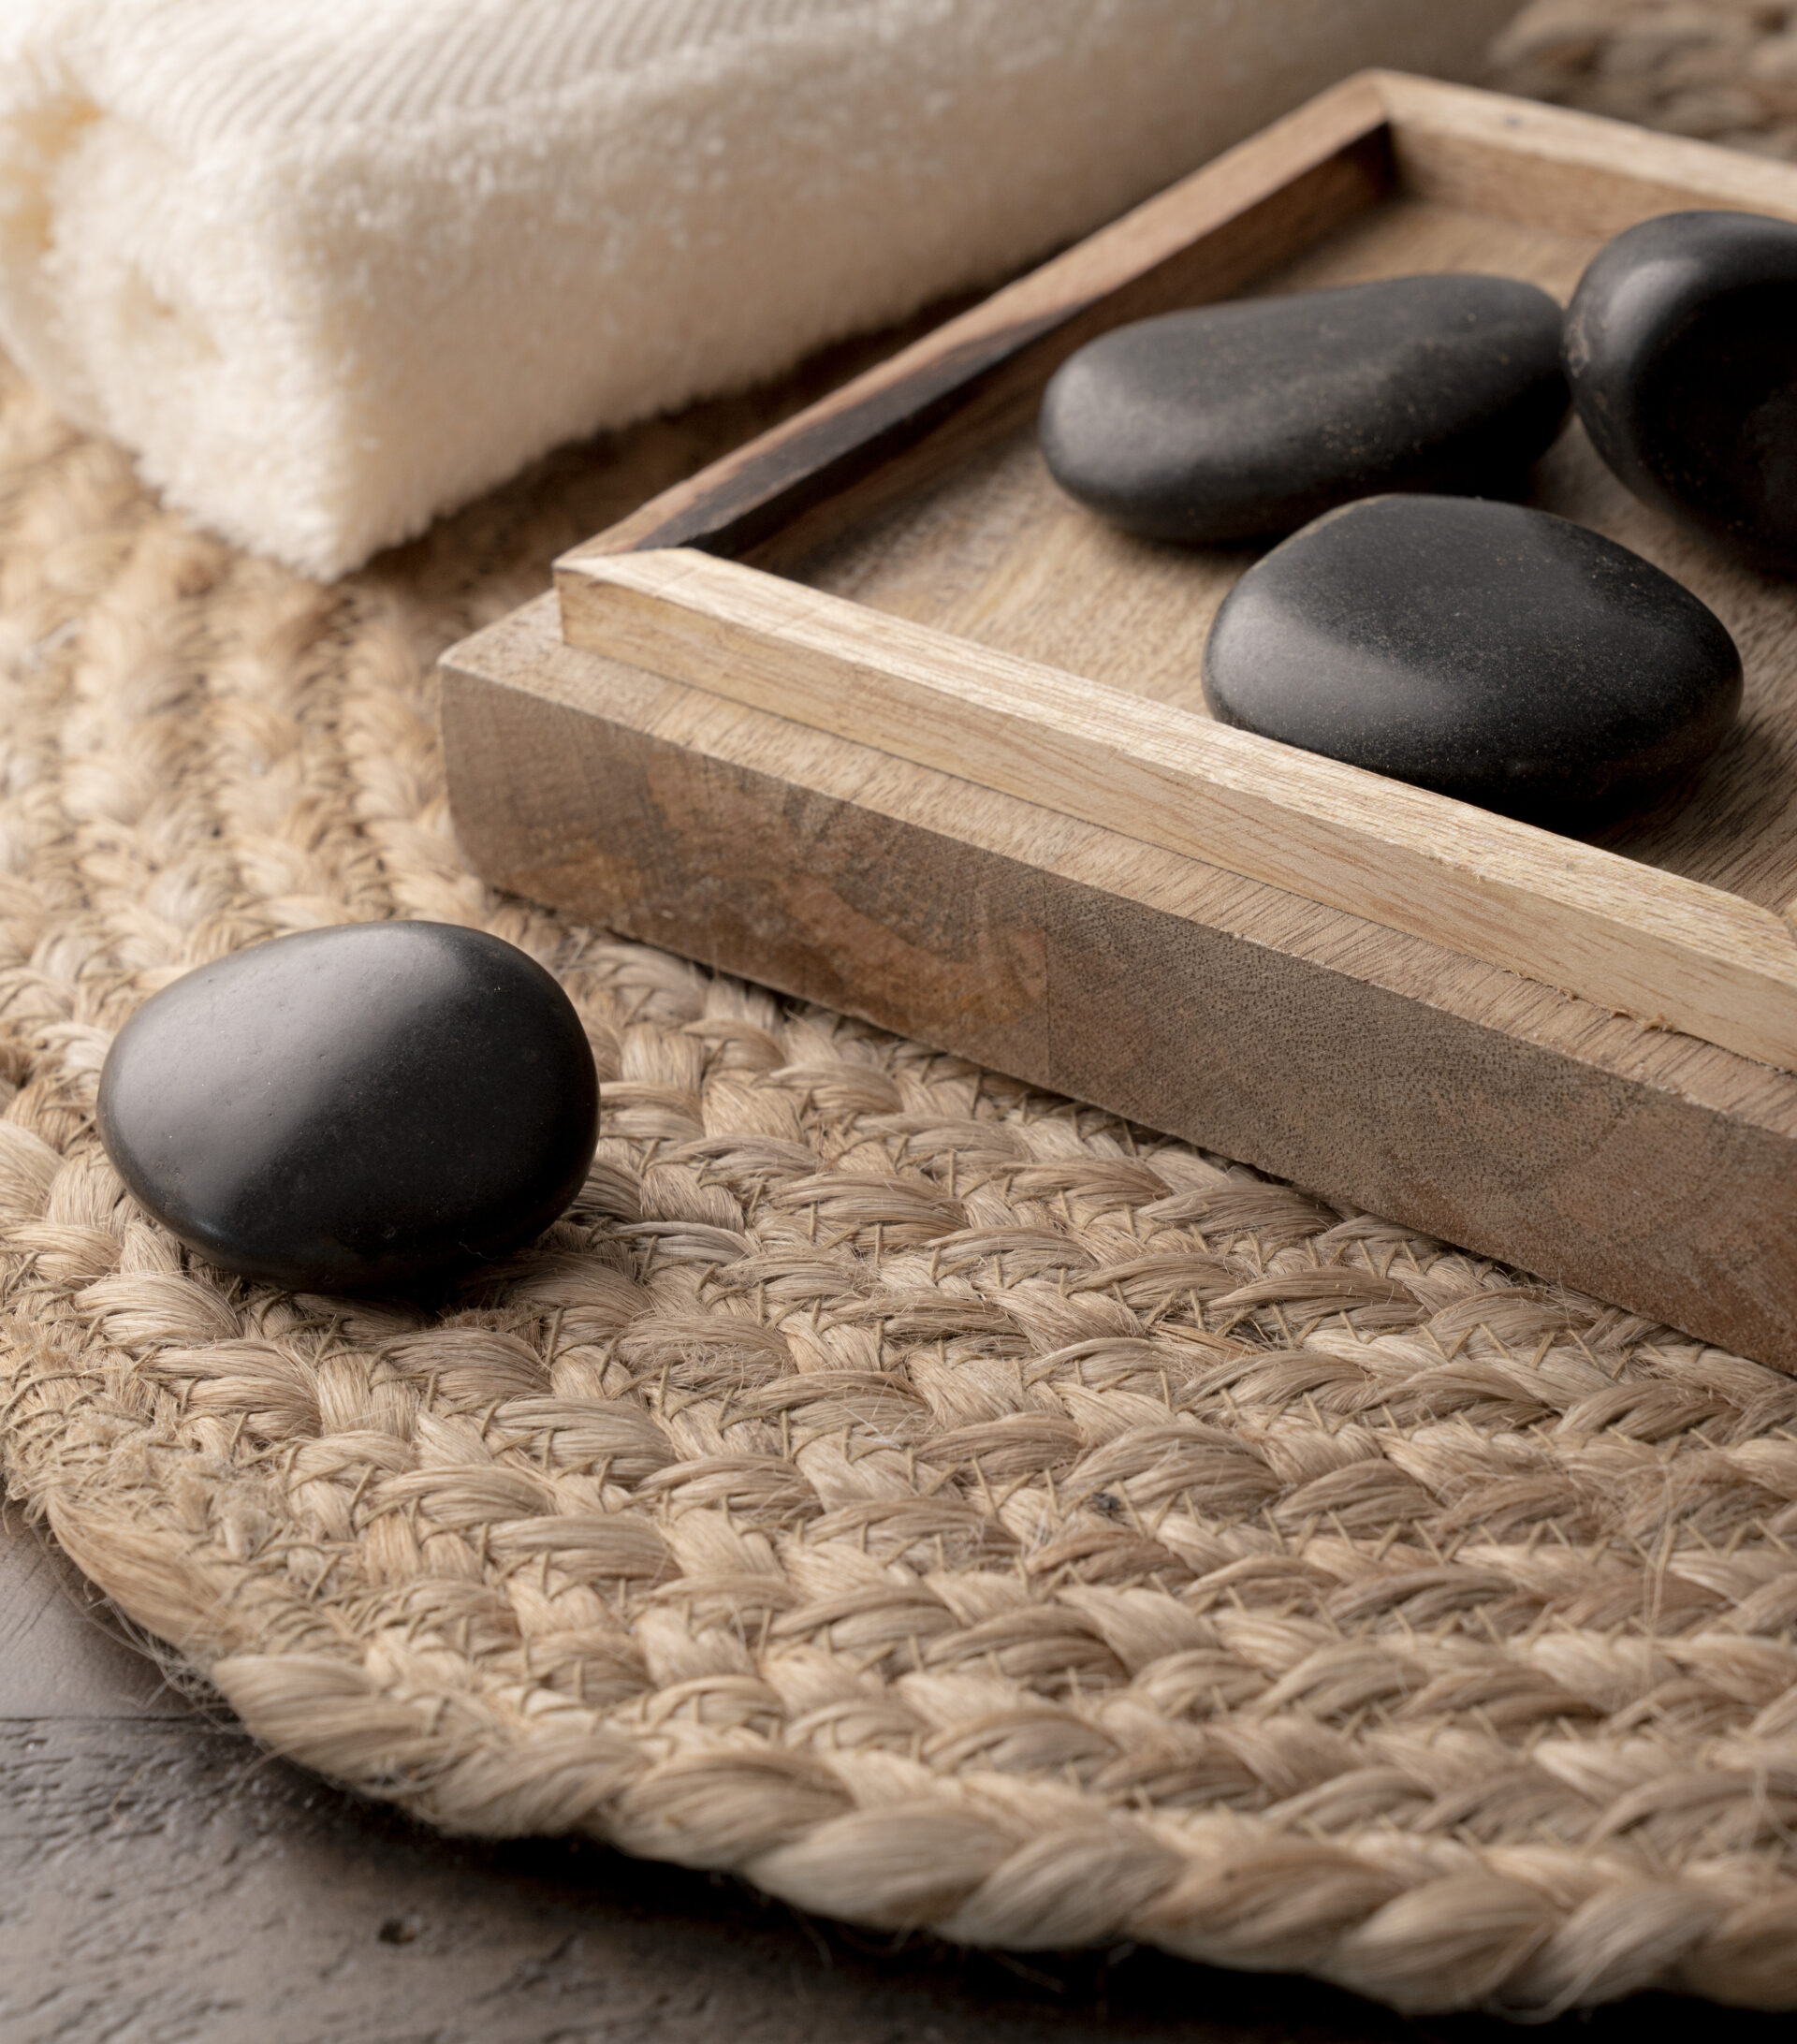 Hot stones in wooden tray next to bath towels - Young Living Lavender Life blog 